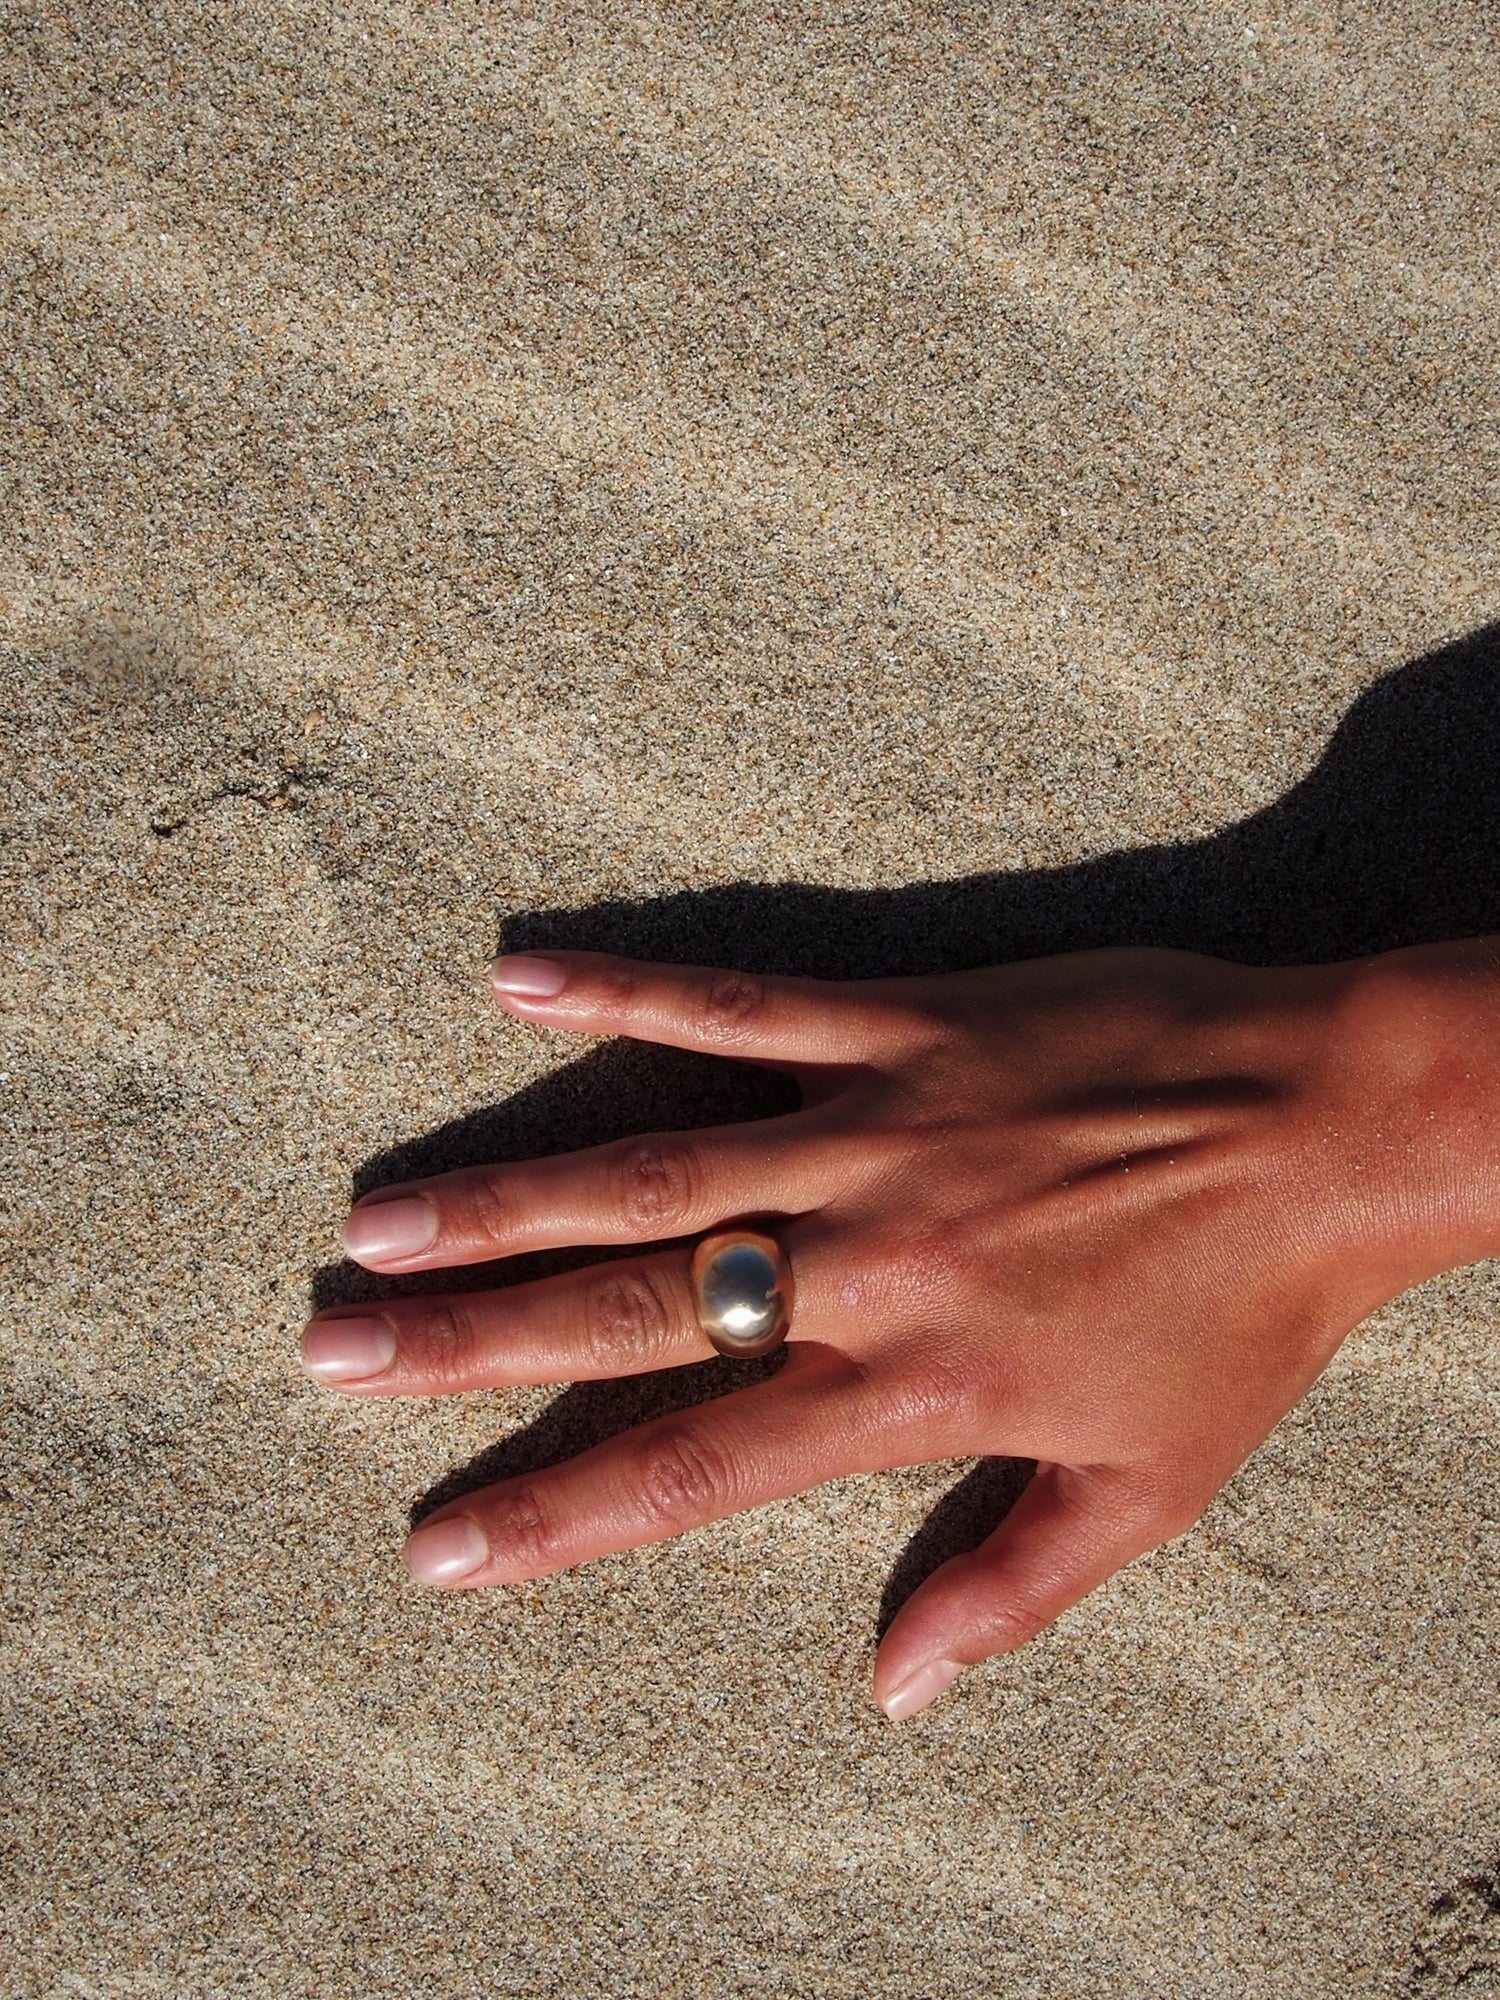 Handcrafted in a dome ring shape, this creation by Soulfull Studio is a product of intricate artistry. Utilizing lost wax casting techniques with recycled bronze, it derives its inspiration from the allure of natural elements. Hand model wearing sol ring with sand background. 